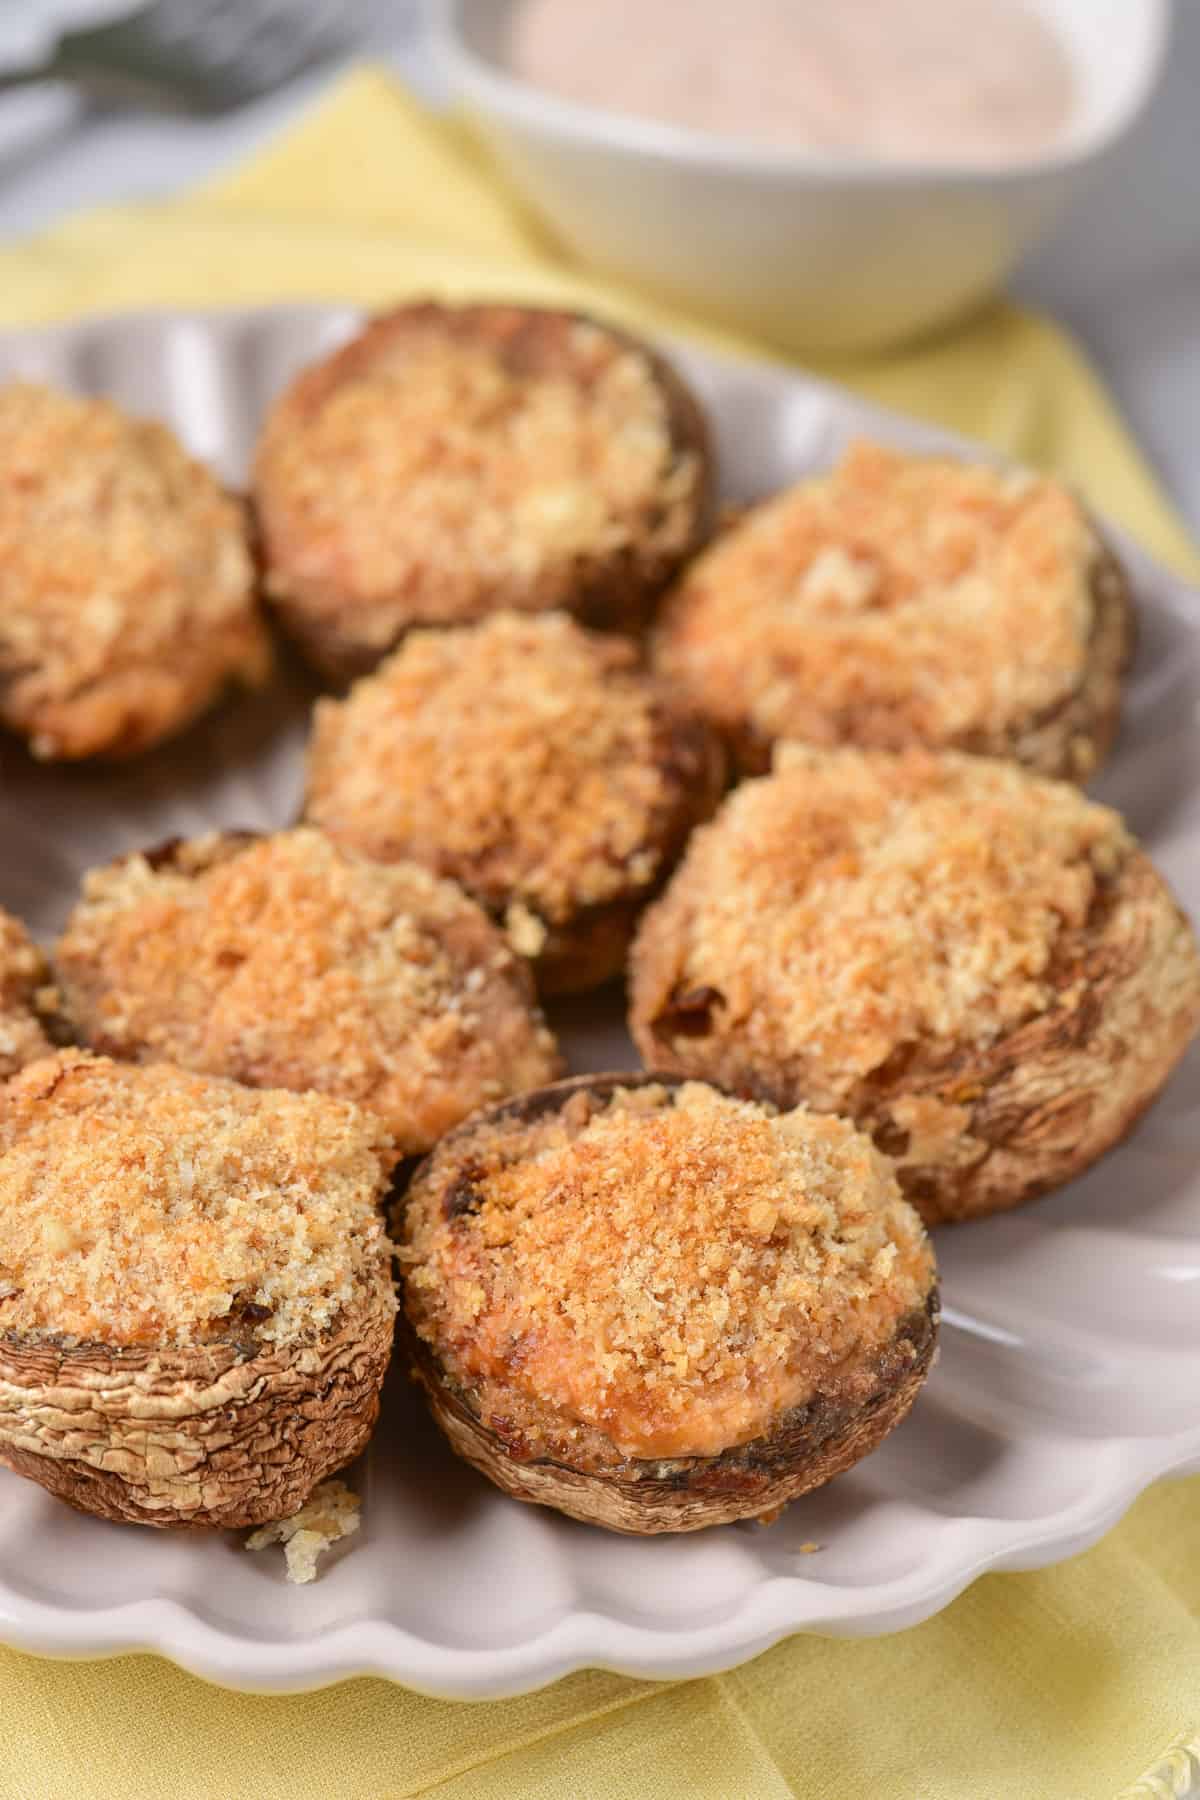 Plate of air fryer stuffed mushrooms with breadcrumb topping.